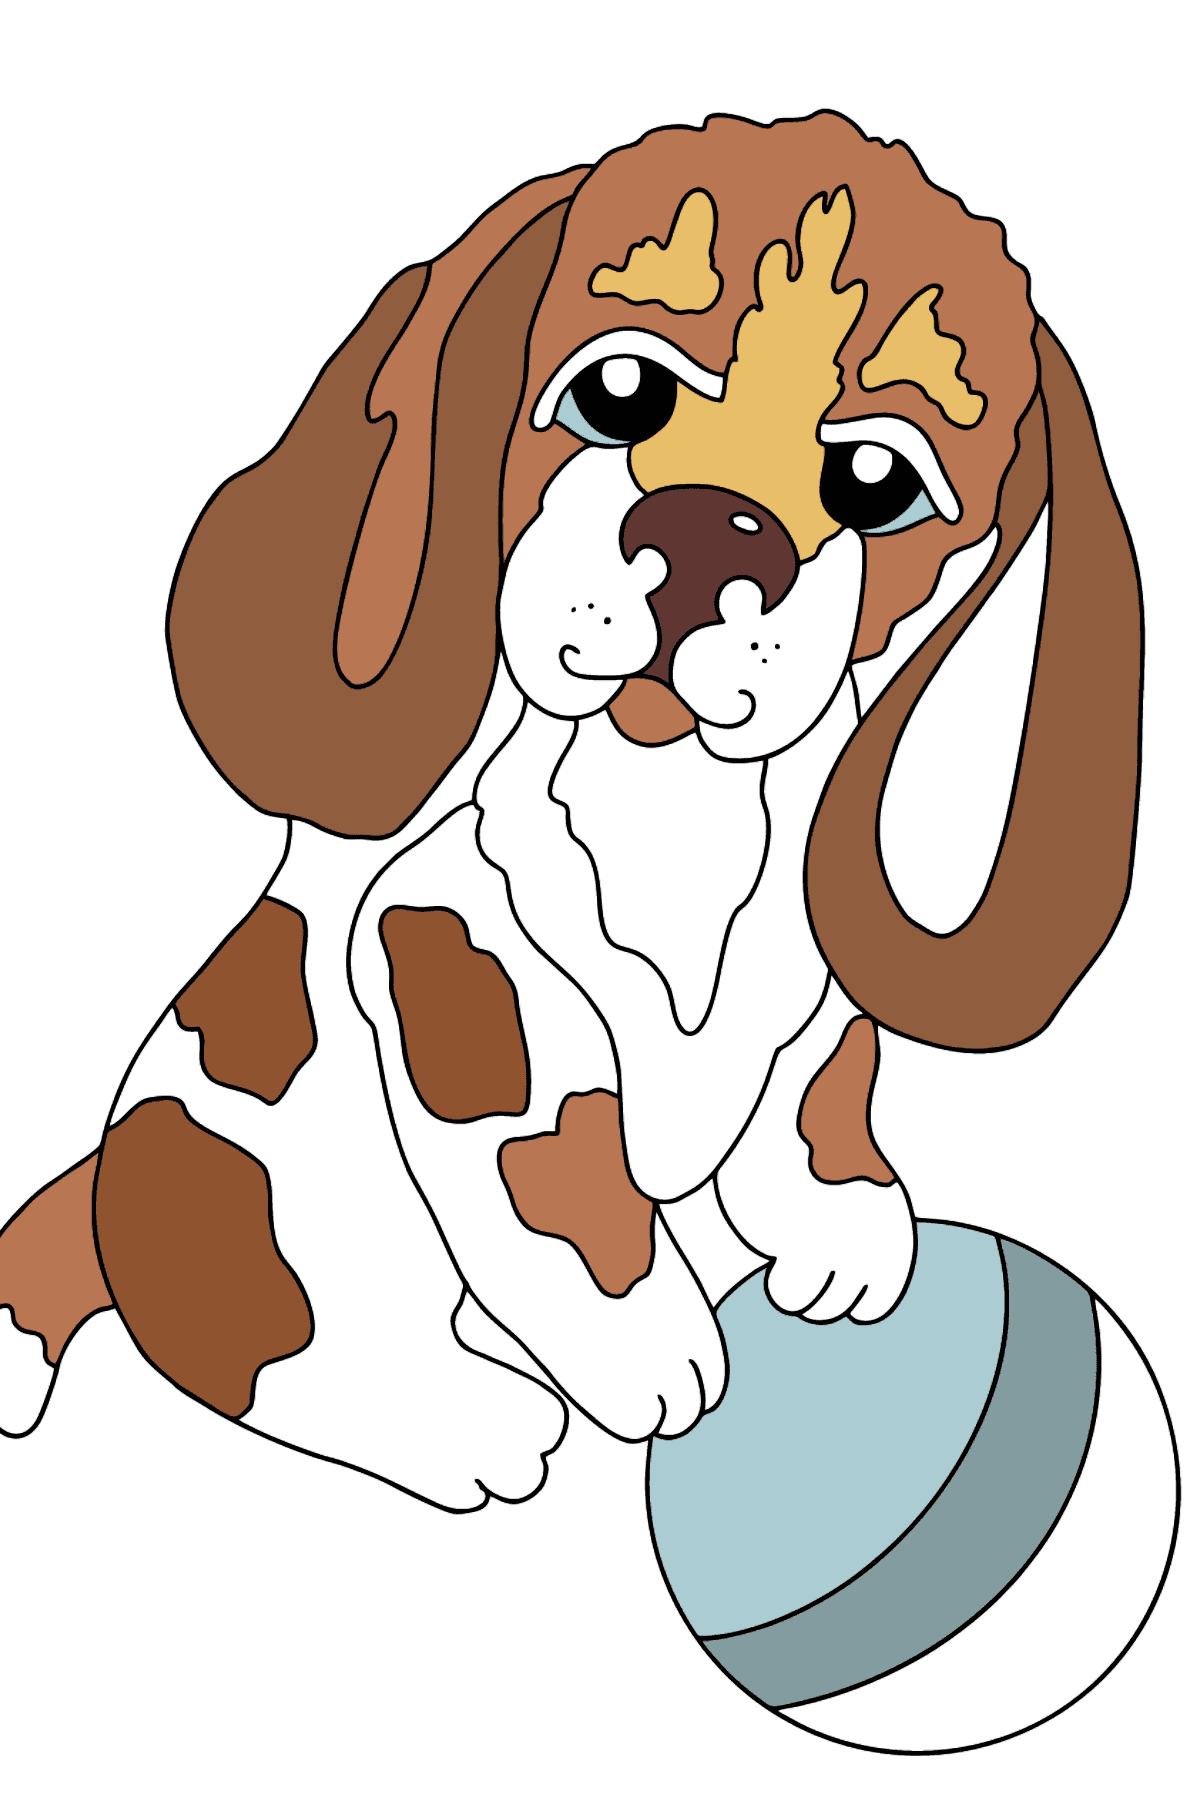 Coloring Page - A Dog is Playing with a Blue Ball  - Coloring Pages for Kids